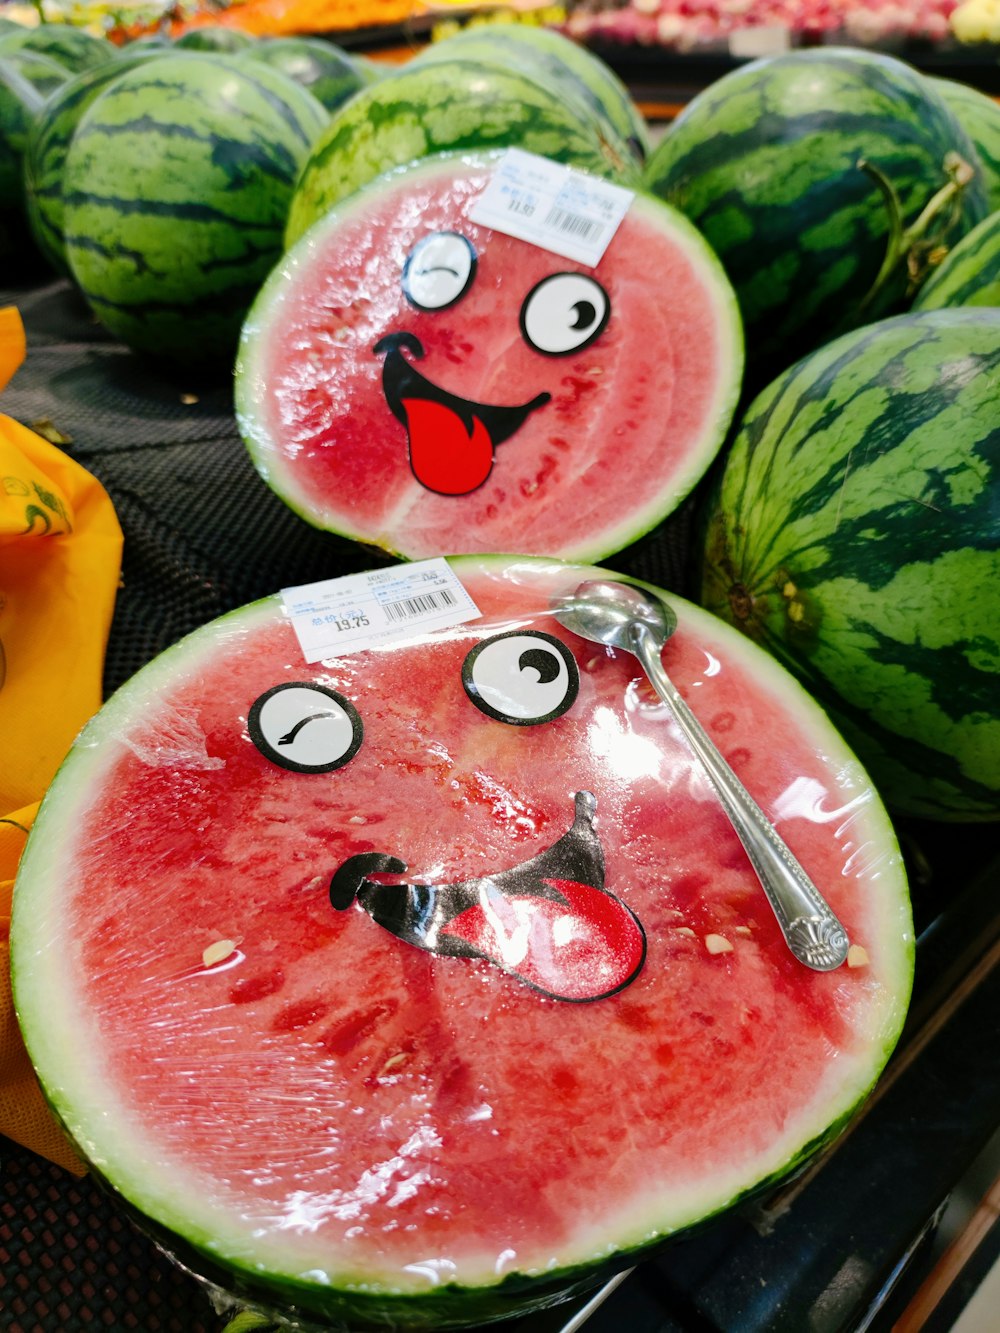 a watermelon with a face drawn on it